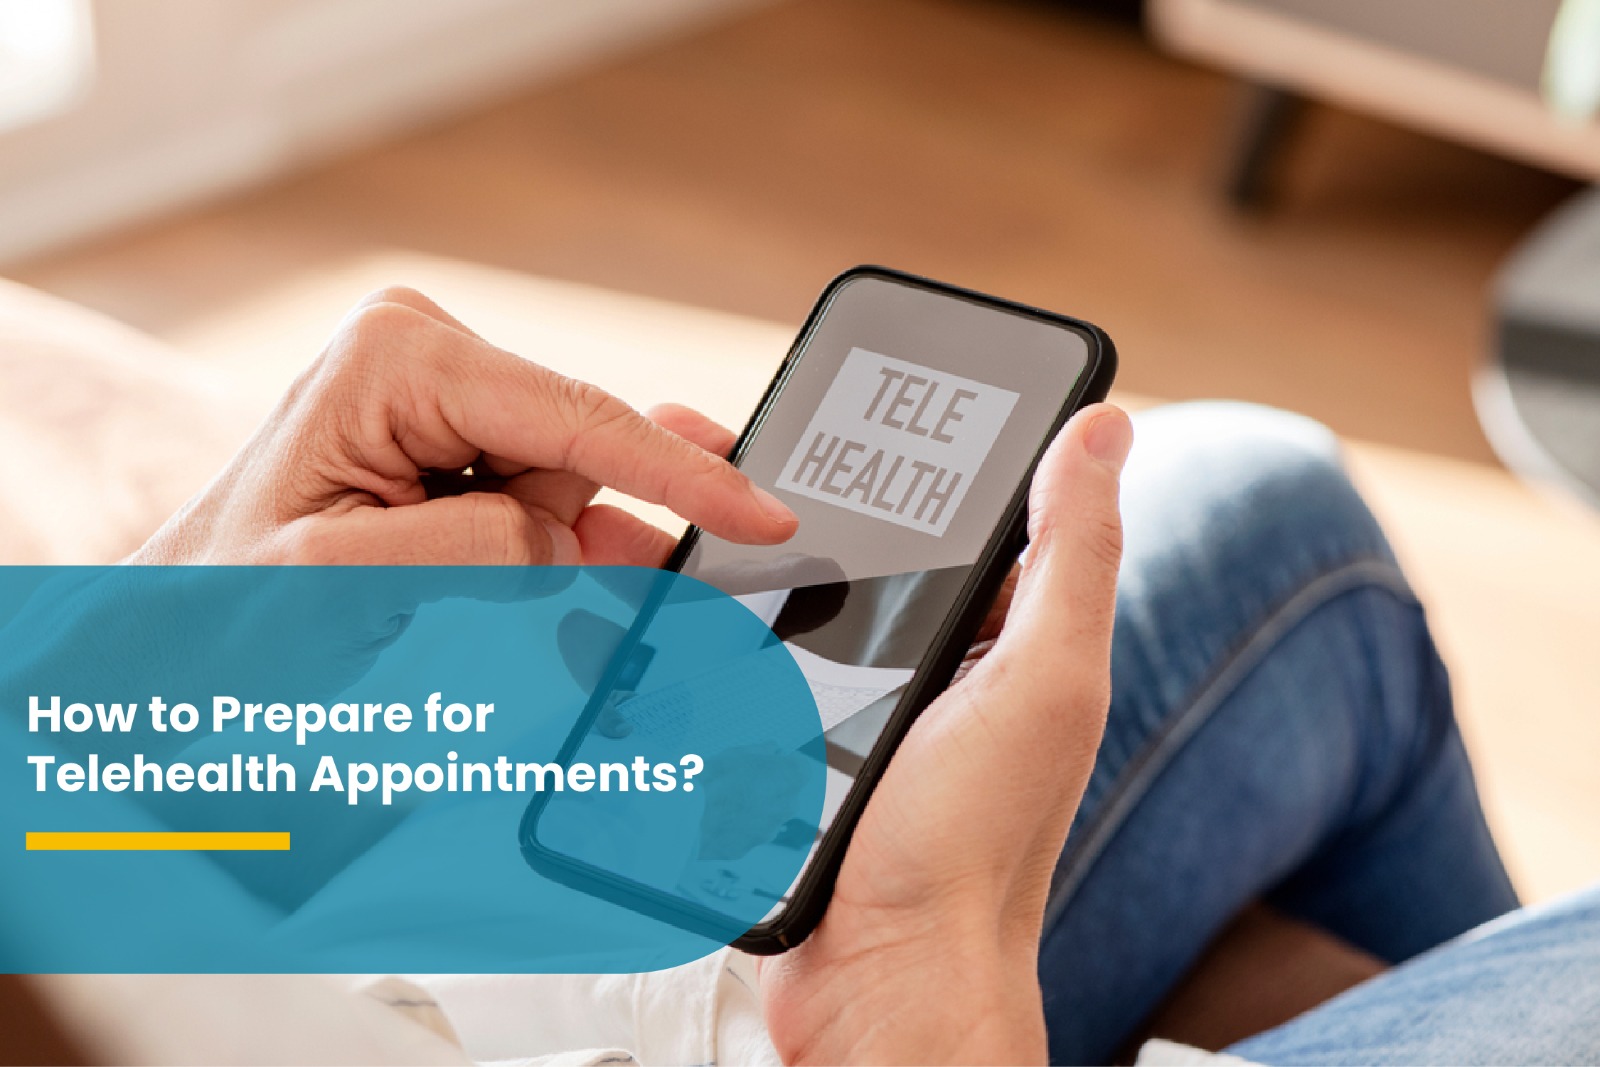 How to Prepare for Telehealth Appointments?